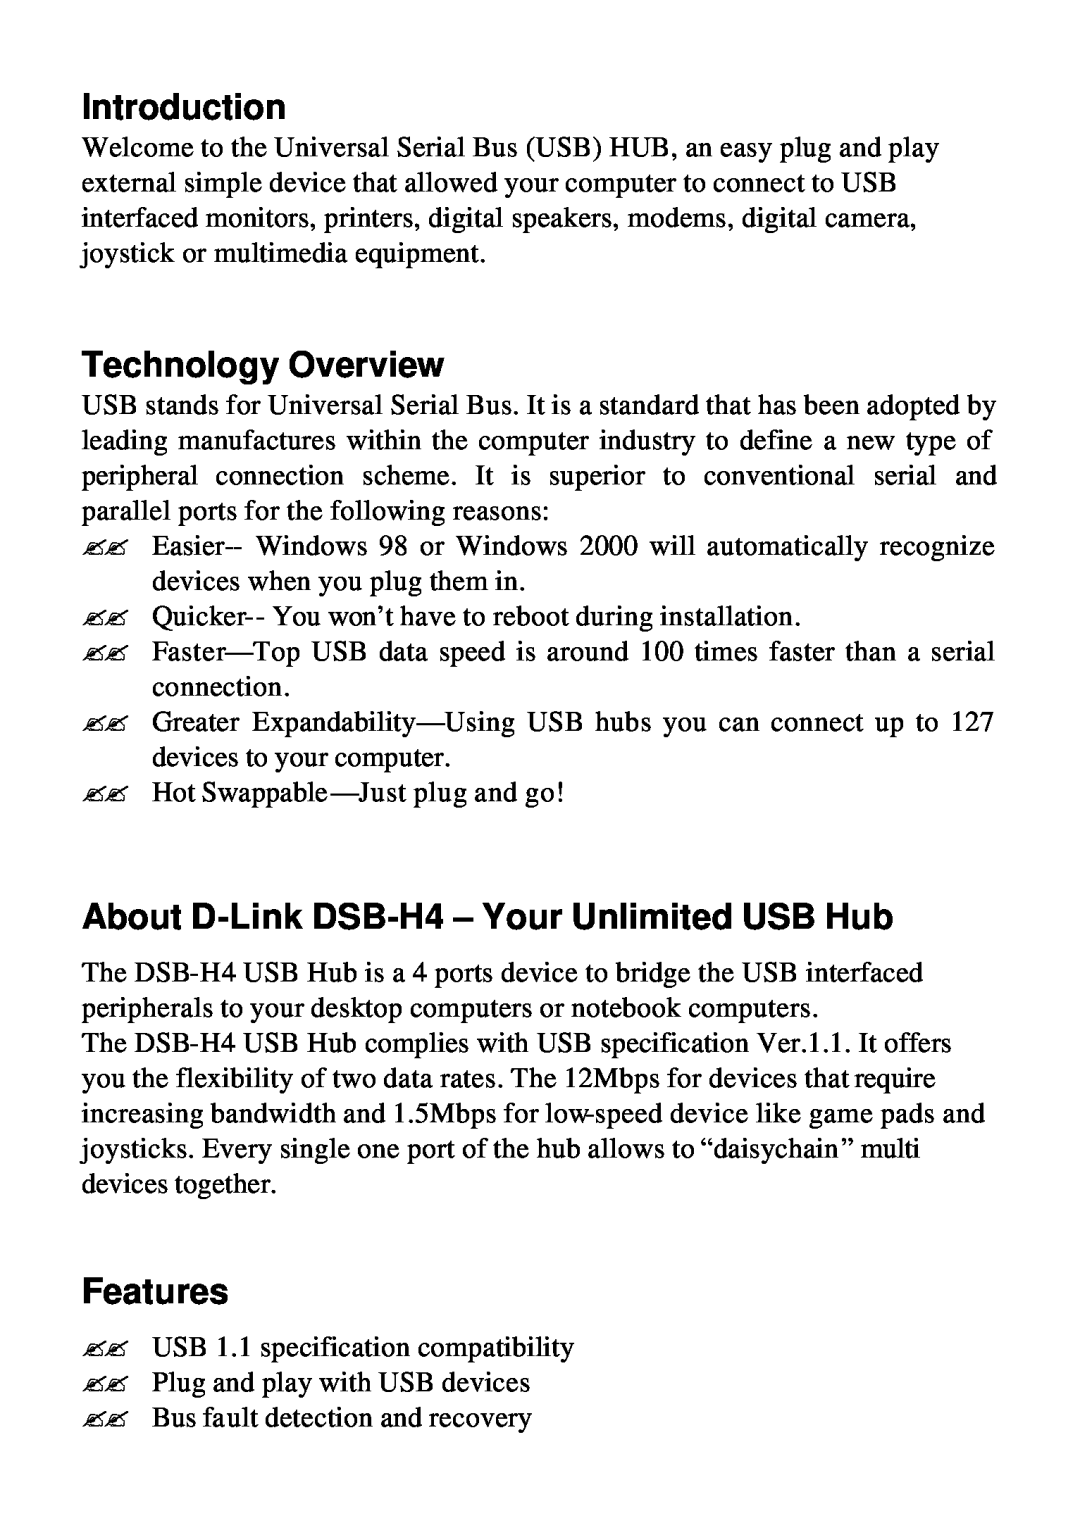 D-Link user manual Introduction, Technology Overview, About D-Link DSB-H4 - Your Unlimited USB Hub, Features 